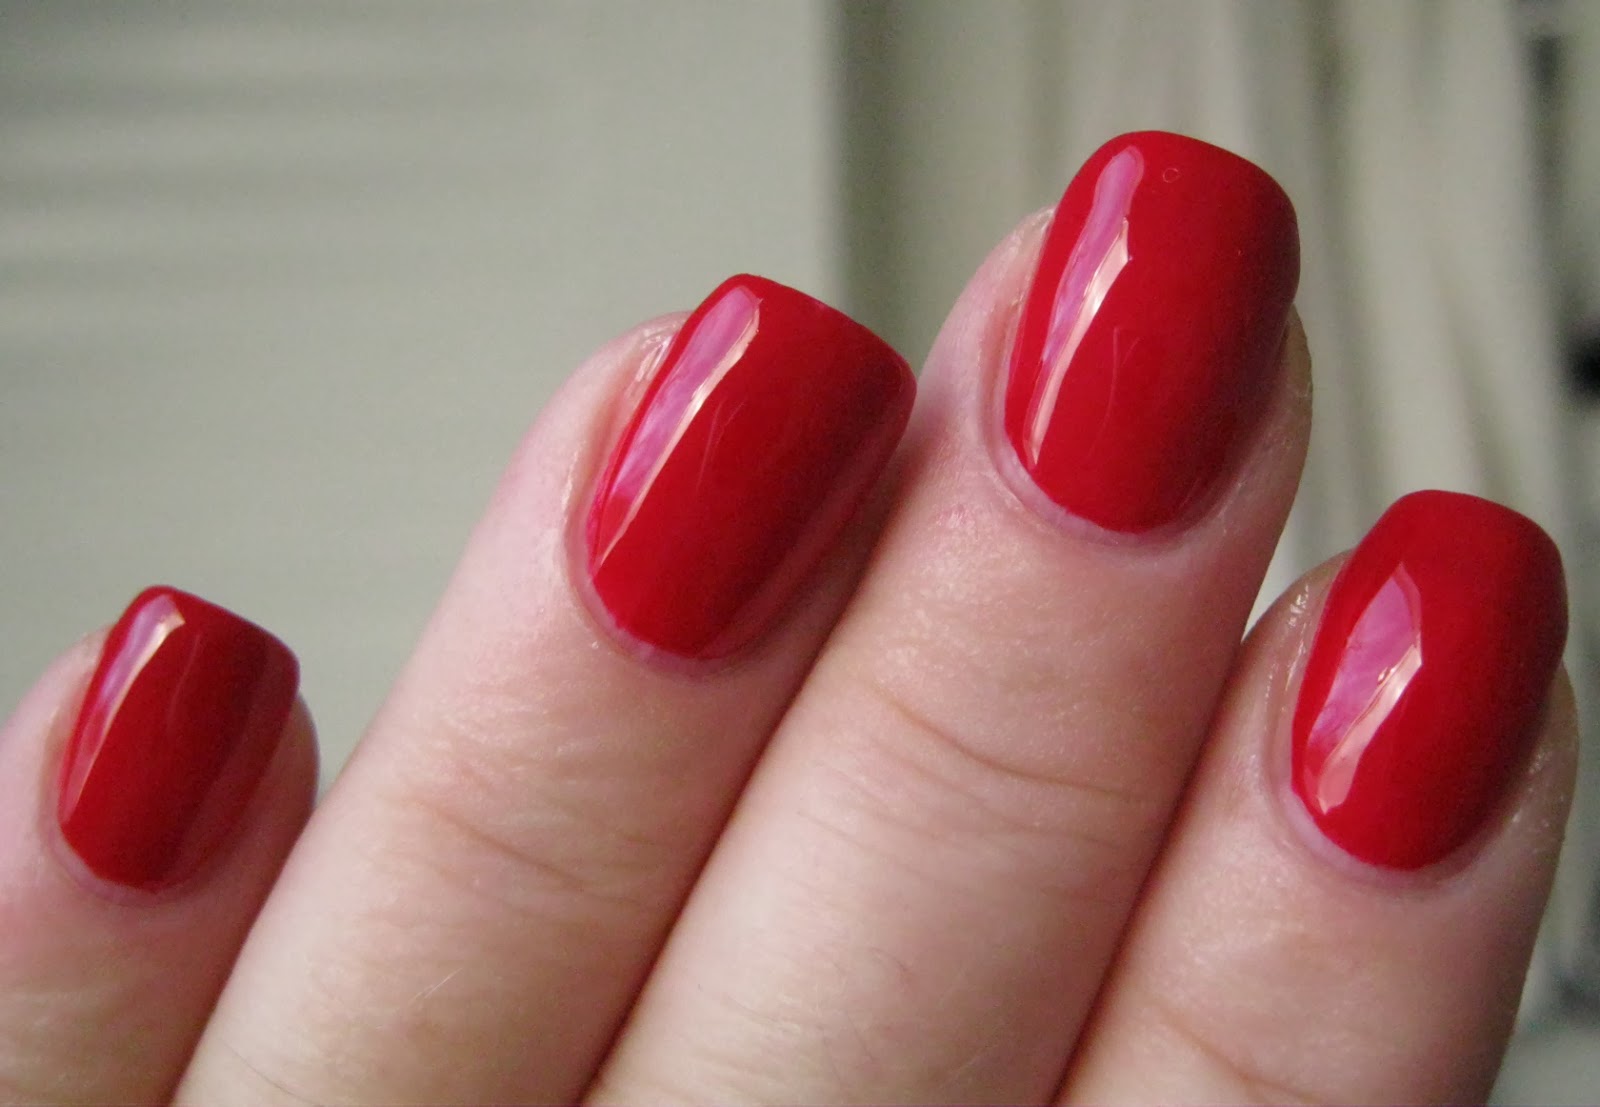 7. Butter London Nail Lacquer in "Come to Bed Red" - wide 7